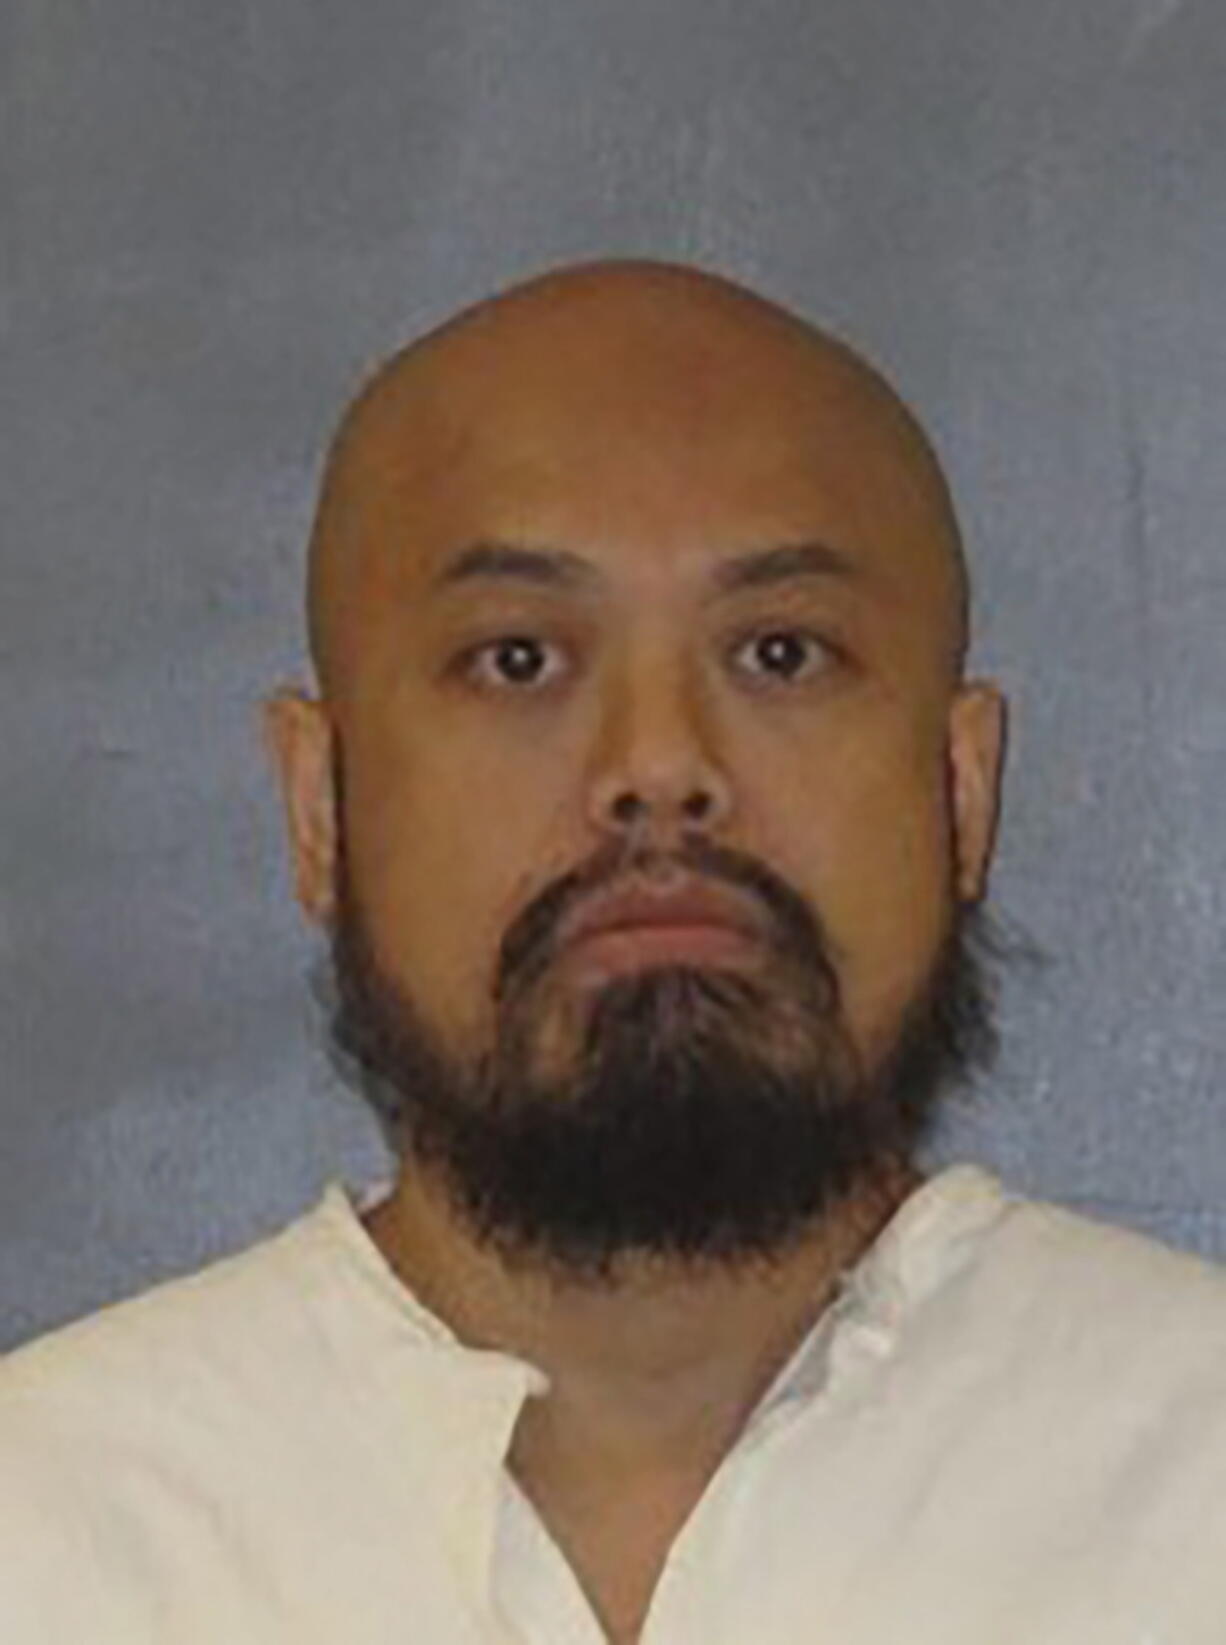 This image provided by the Texas Department of Criminal Justice shows Texas death row inmate Kosoul Chanthakoummane, who is scheduled to receive a lethal injection Wednesday, Aug. 16, 2022, in Huntsville, Texas. Chanthakoummane a North Carolina parolee faces execution for the slaying of a suburban Dallas real estate agent more than 16 years ago. He's condemned for fatally stabbing 40-year-old Sarah Walker in July 2006.